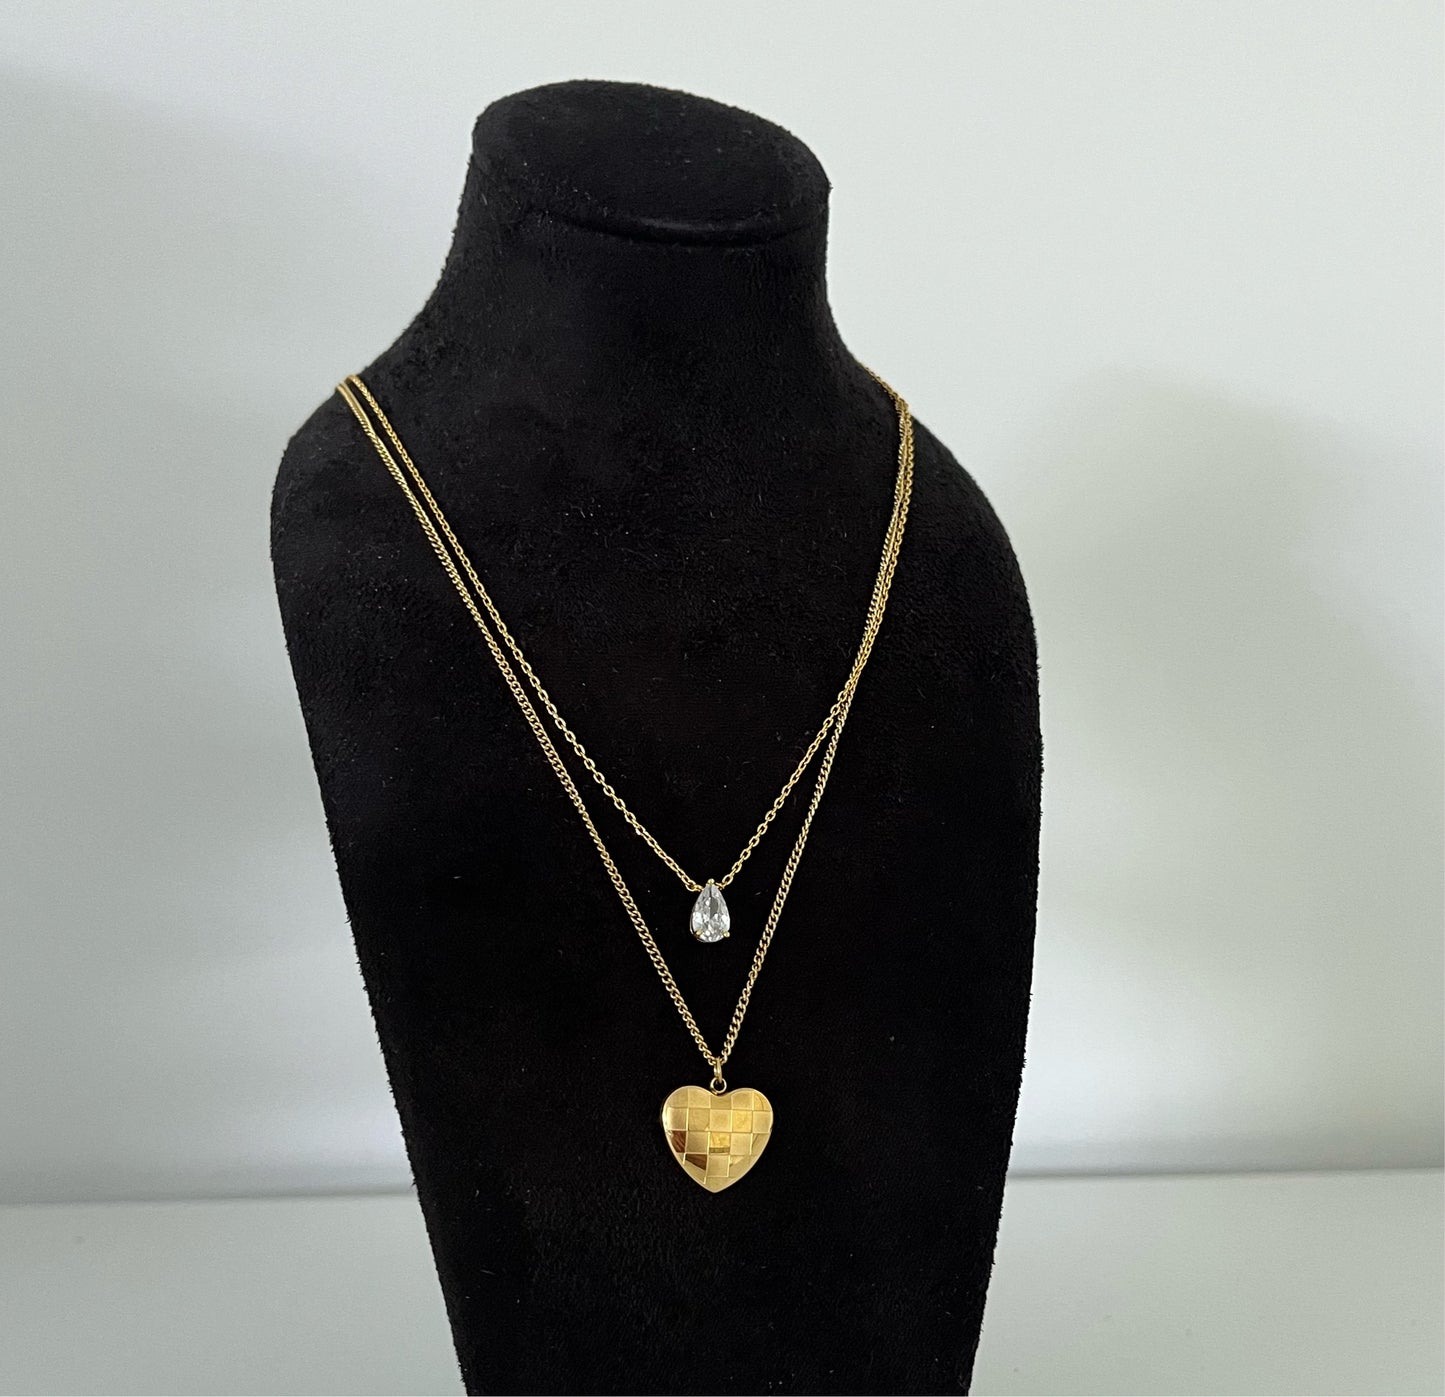 Tear Drop Diamante Necklace - 18ct Gold Plated